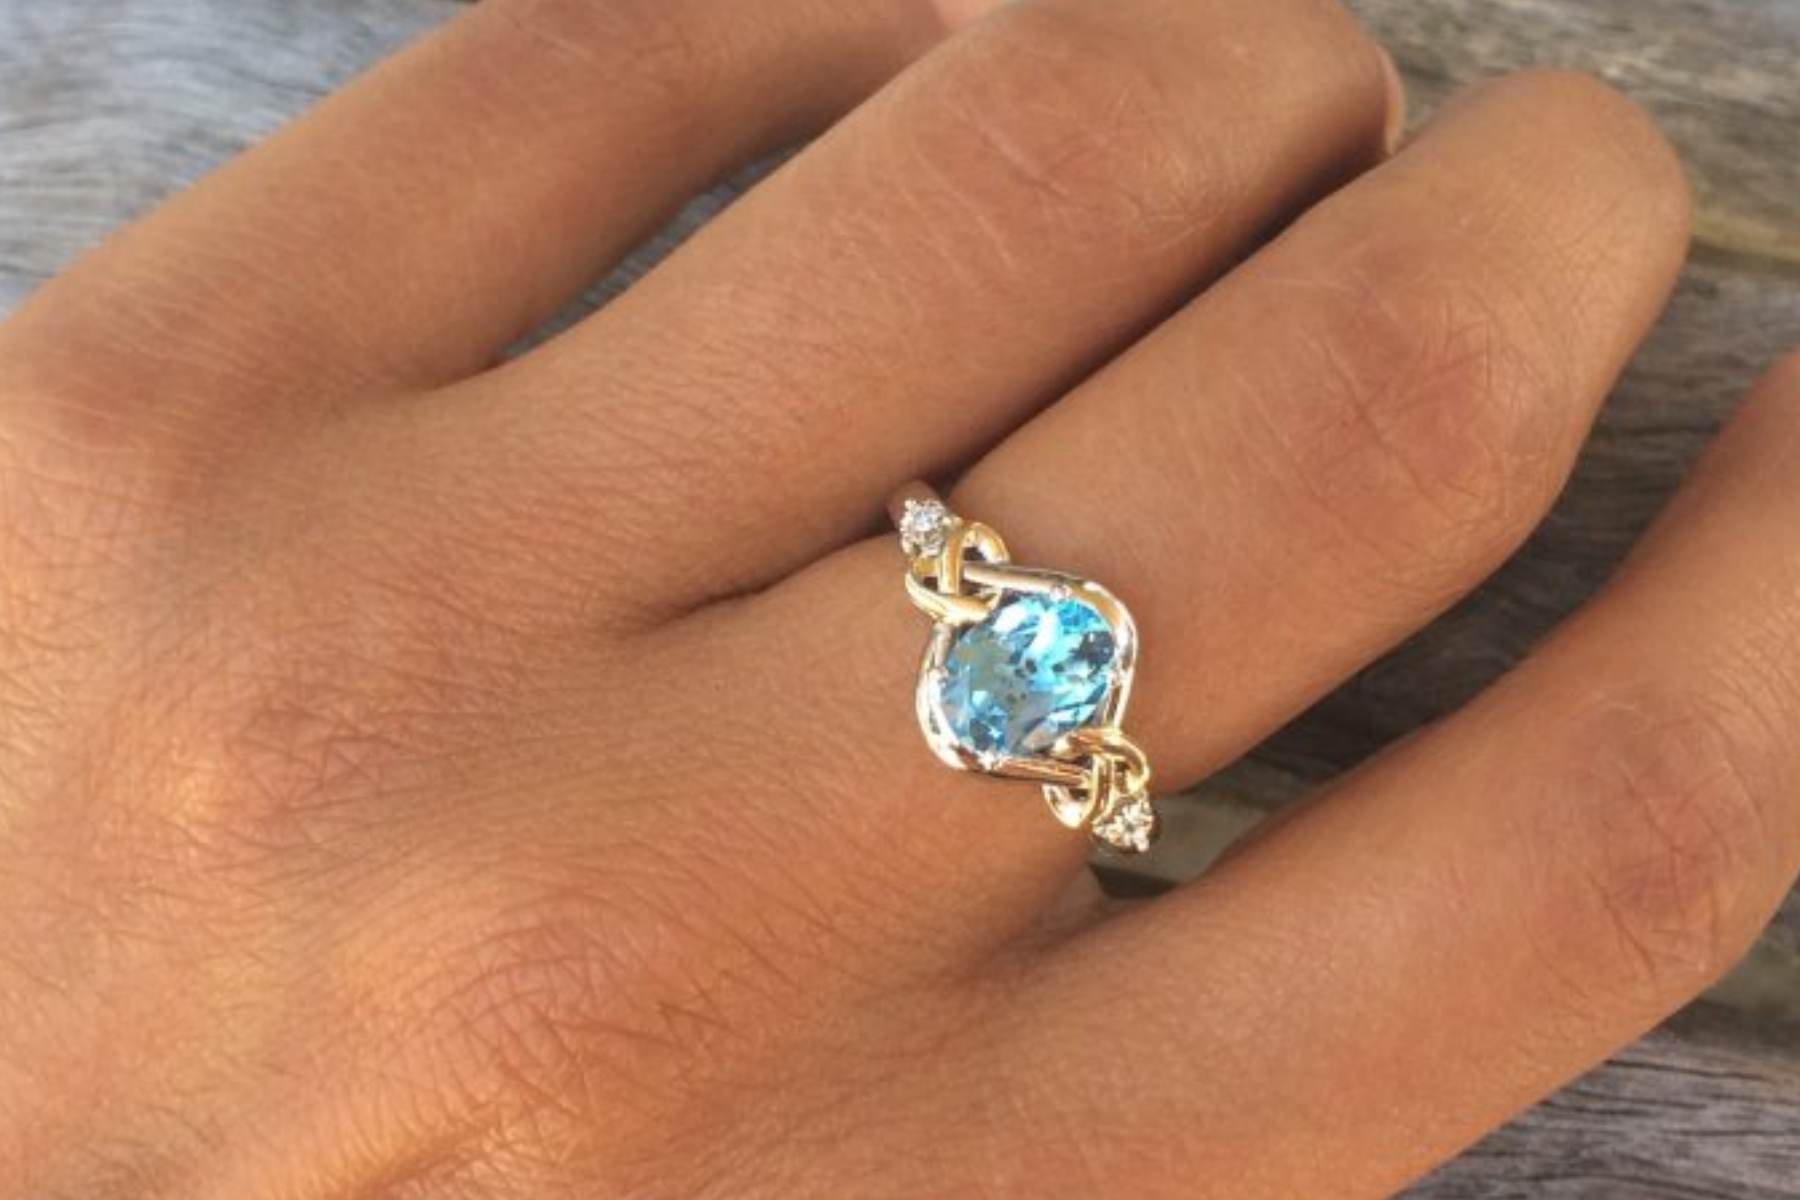 A blue topaz ring on a person's hand